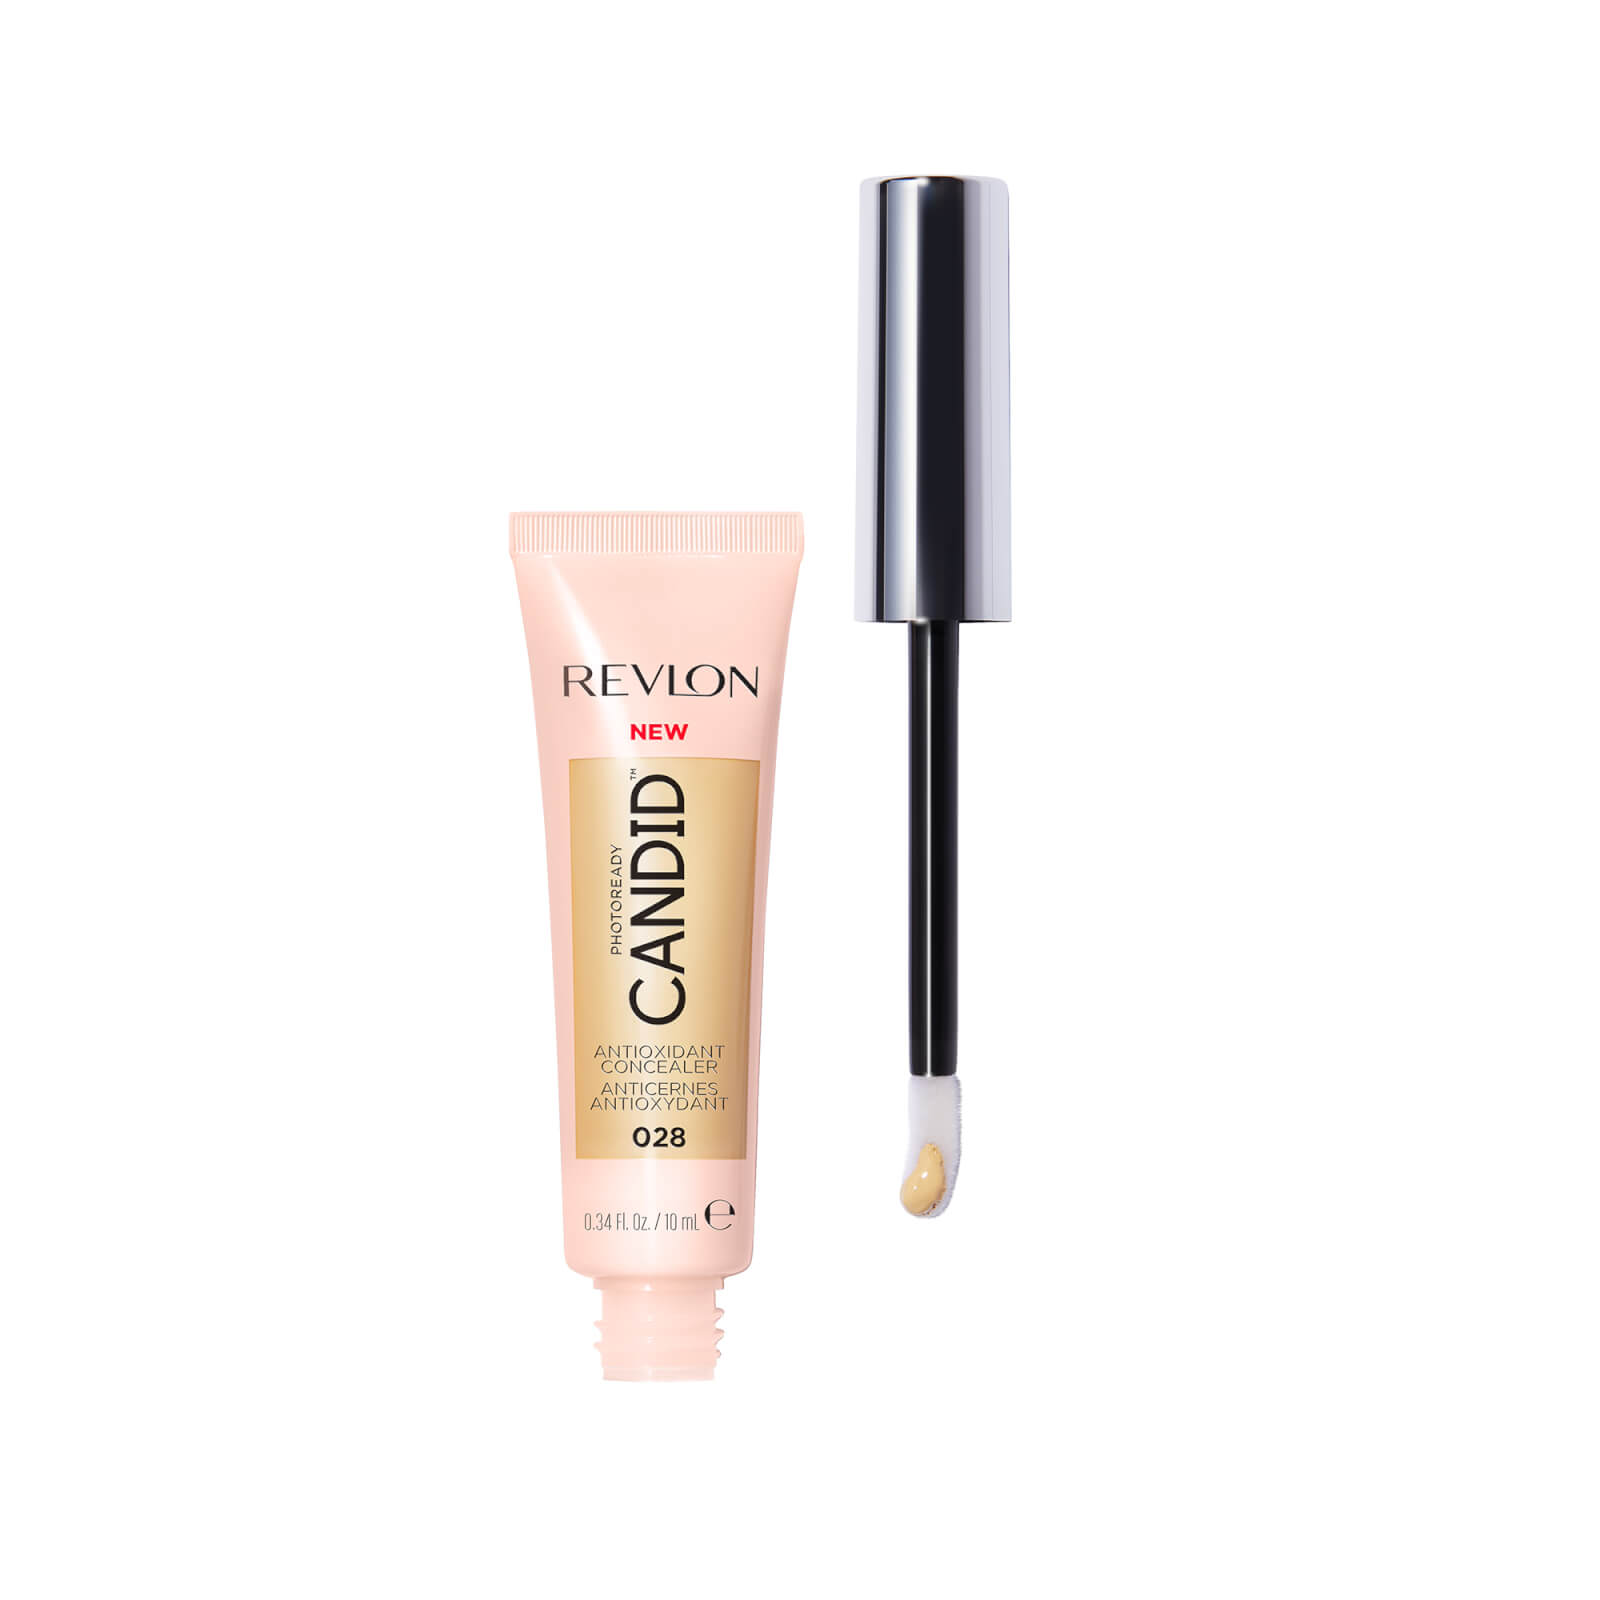 Revlon Photoready Candid Anti-Pollution Concealer (Various Shades) - Oat